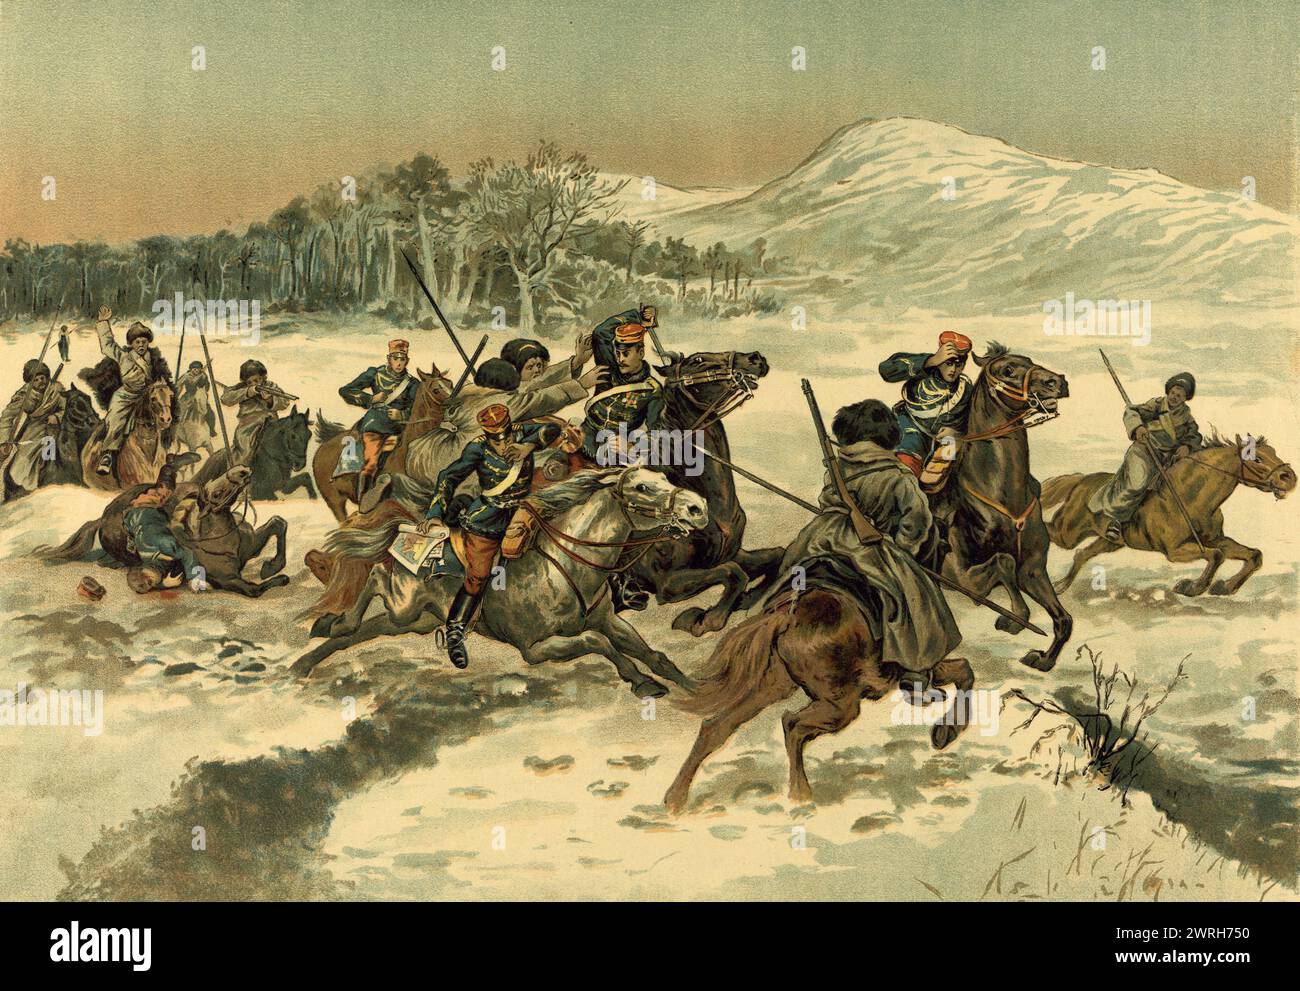 1st Cossack Skirmish with the Japanese in Korea, 1904. This collection includes tsarist-era advertisements and a set of posters from the era of the Russo-Japanese War (1904-5) that contains images reflecting a Russian perspective of that war. National Library of Russia Stock Photo